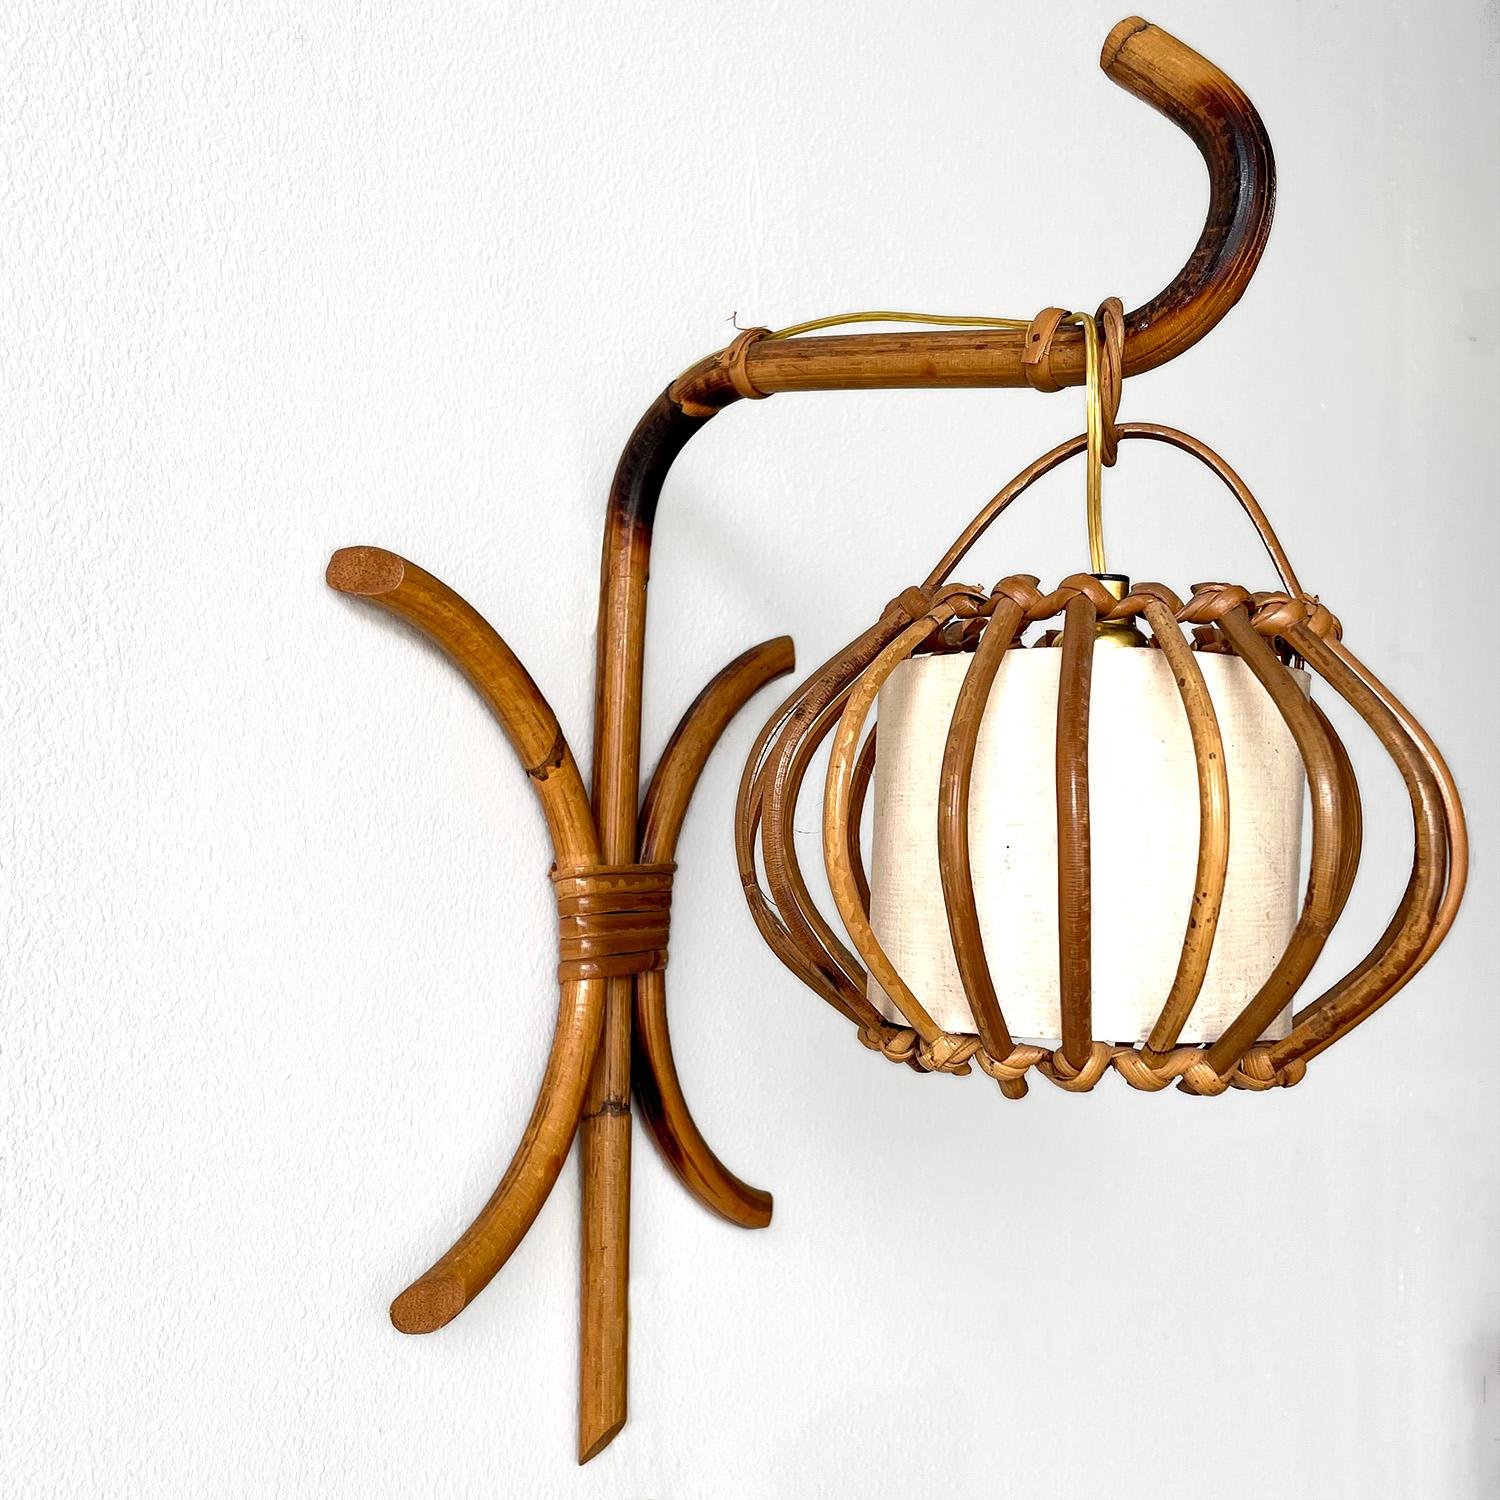 Pair of Louis Sognot “lantern” sconces
France, circa 1960’s 
Sculptural rattan ascending arm holds a delicate rattan lantern shade 
Original shade lining shows signs of age
Composed of natural materials
Each lamp is unique in its